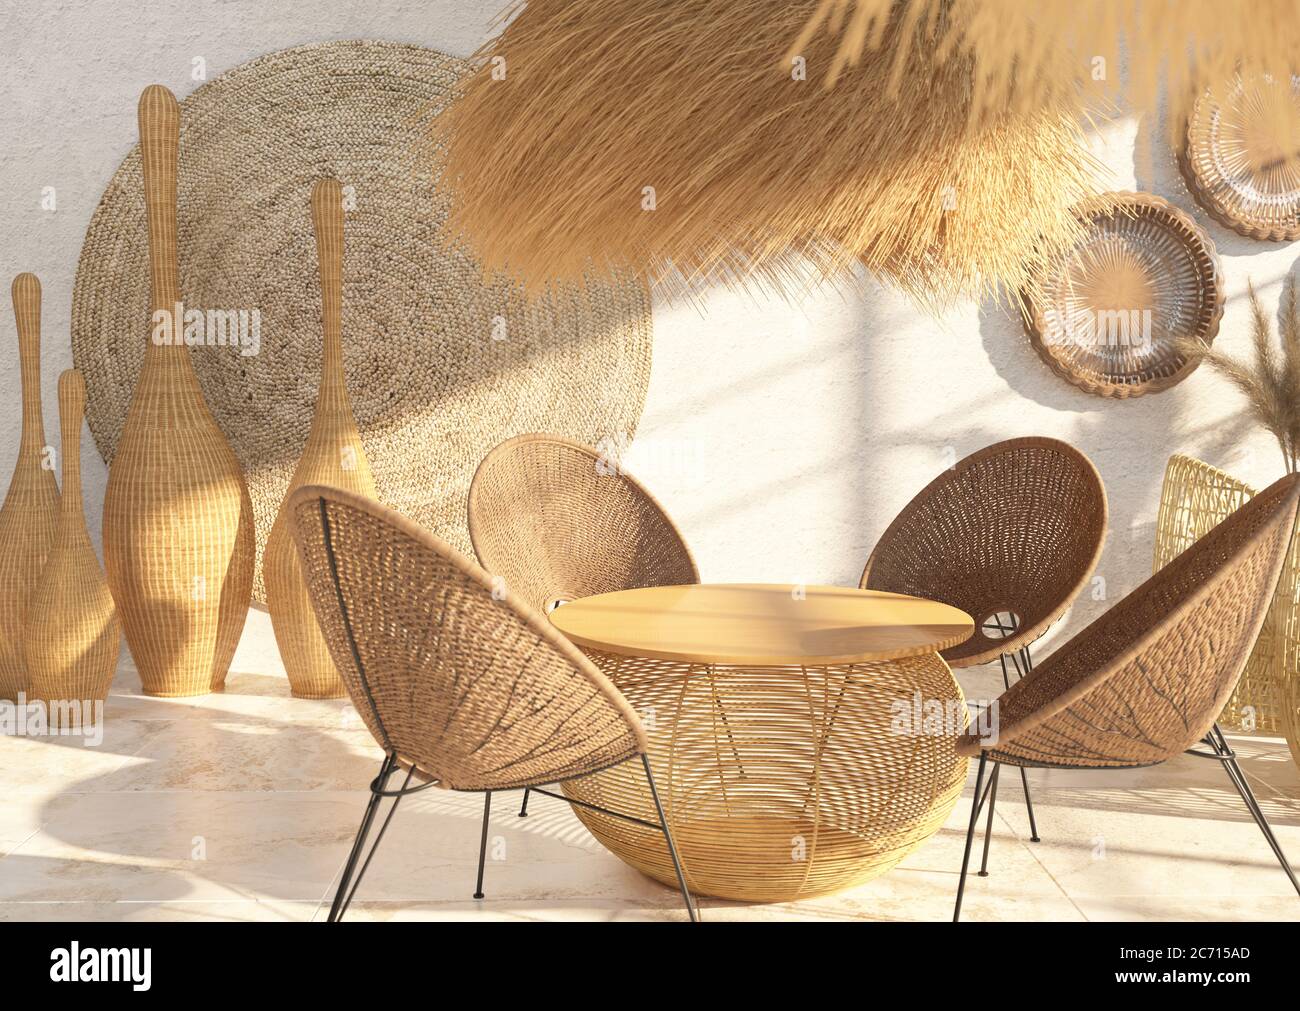 Interior of a cafe or restaurant with wicker furniture and rattan and straw décor. Round dining table. Ethnic style. 3D rendering Stock Photo